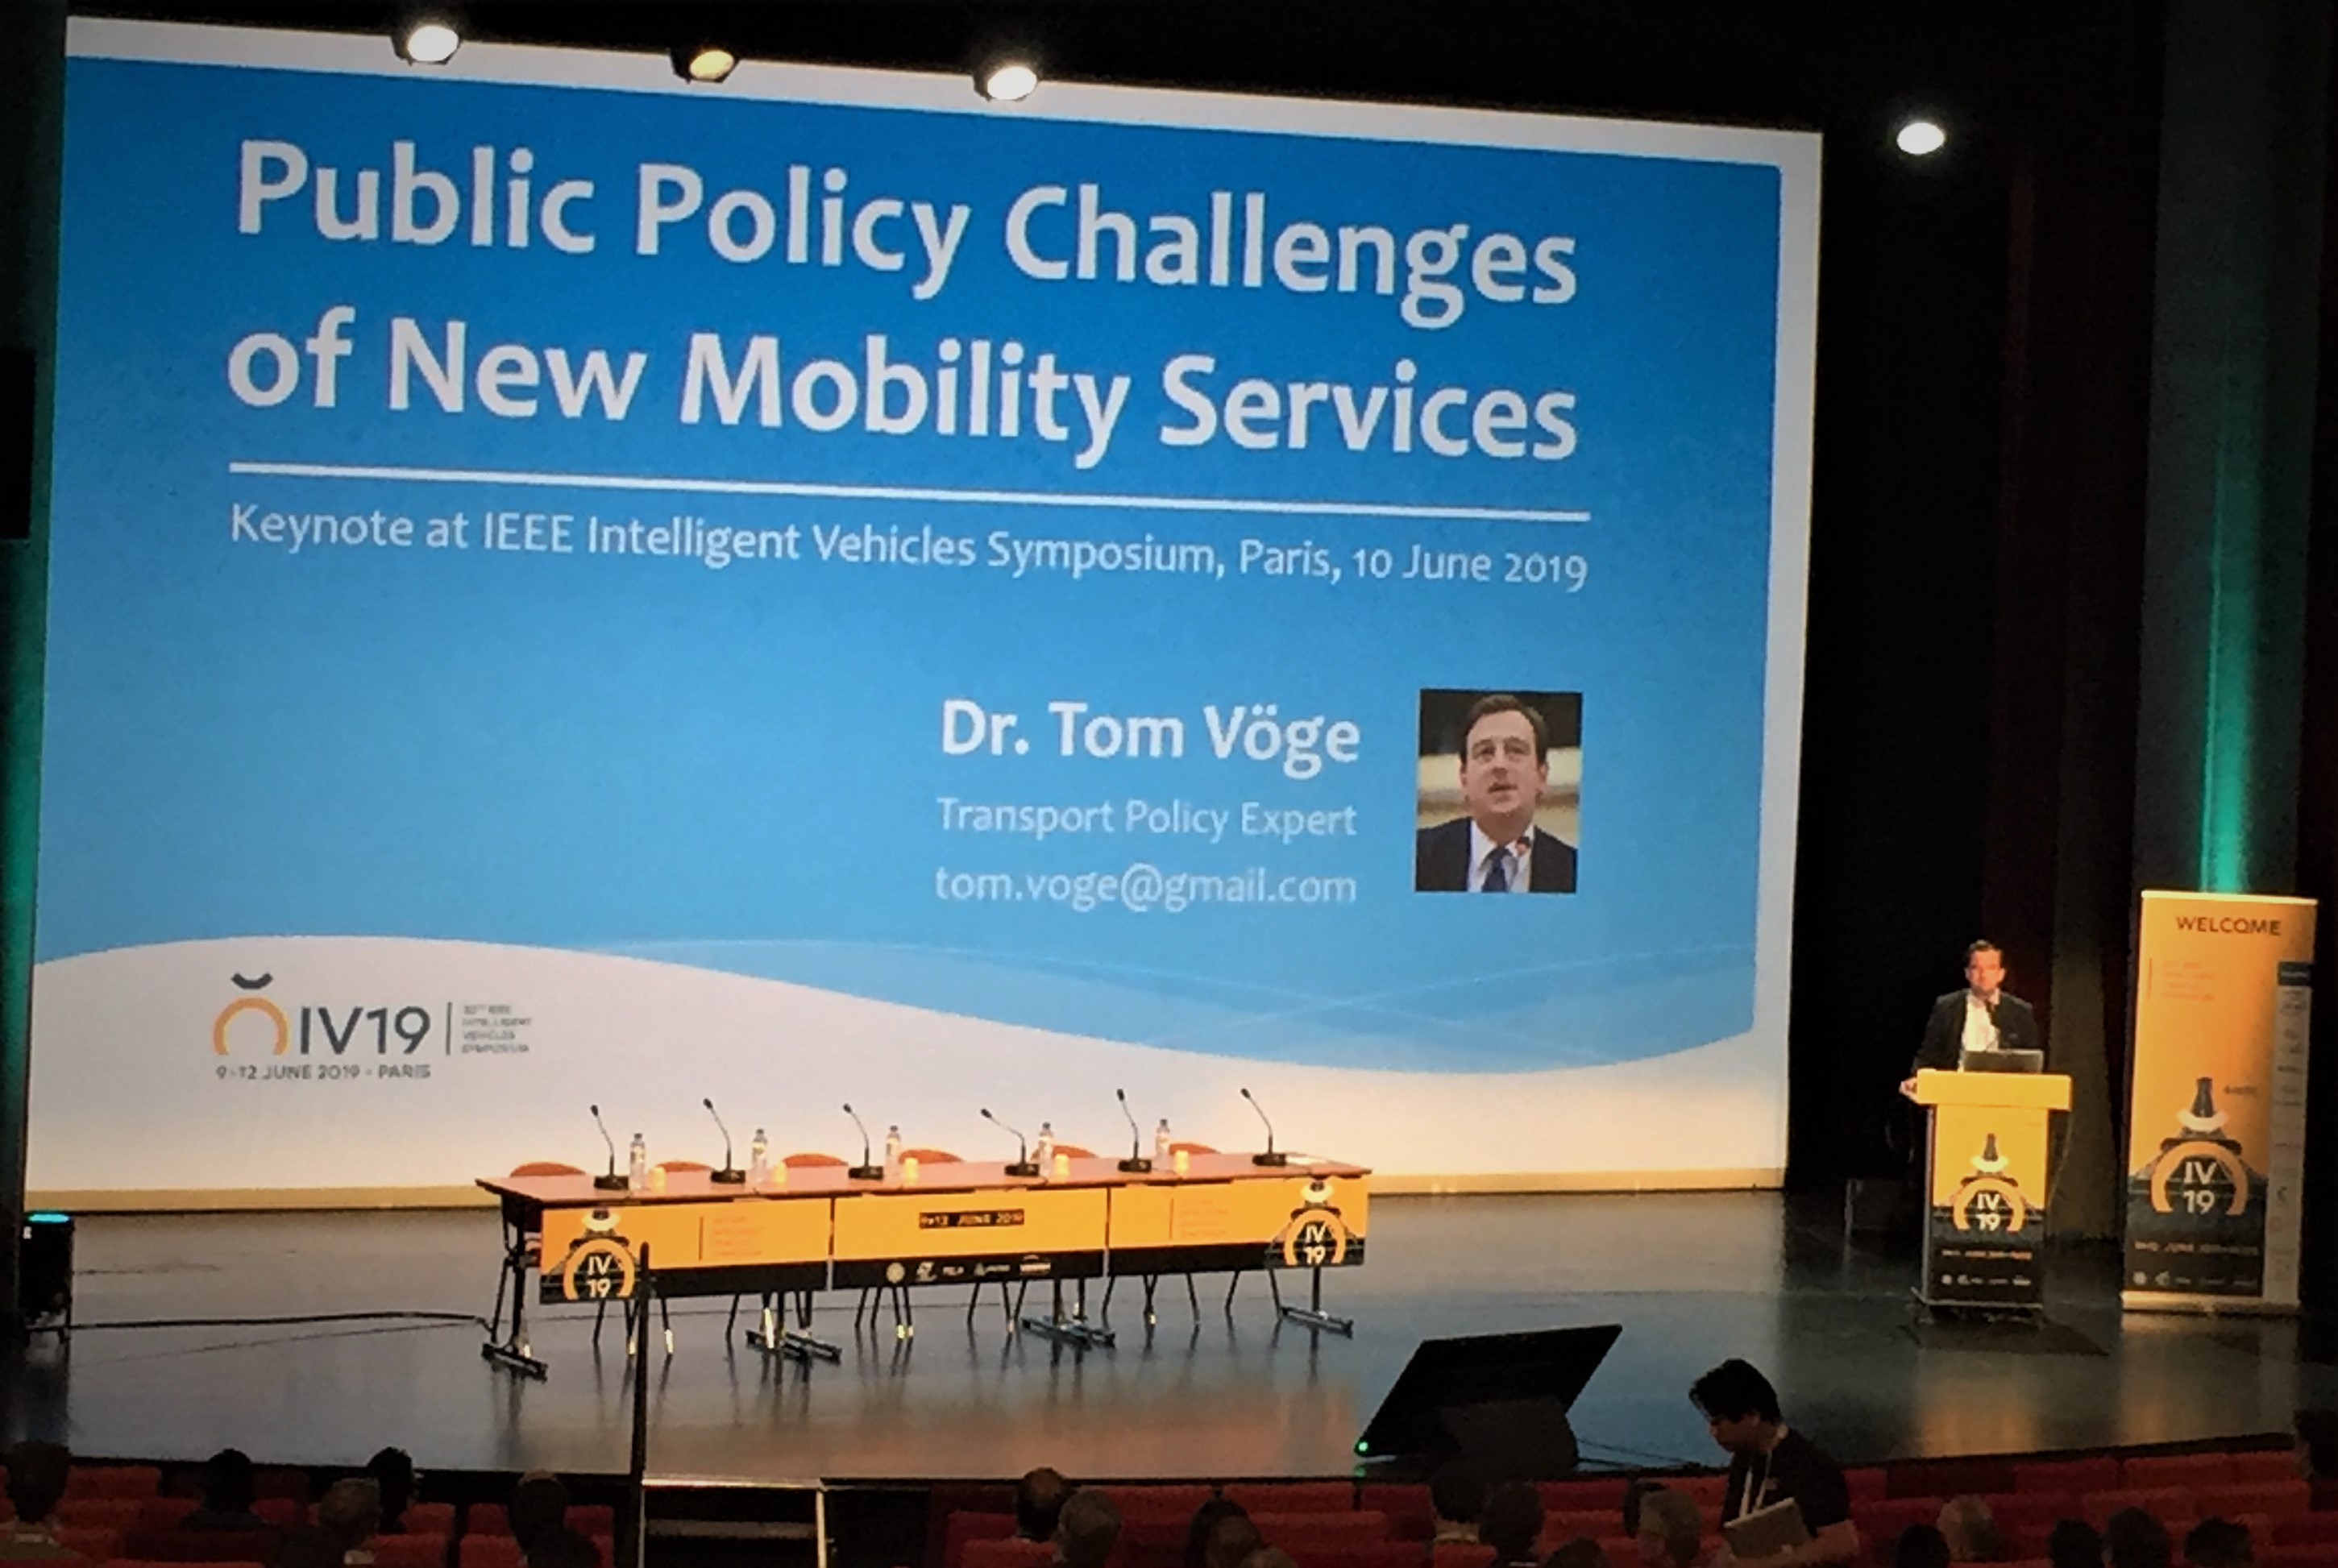 Keynote by Tom Vöge. Source: author provided.